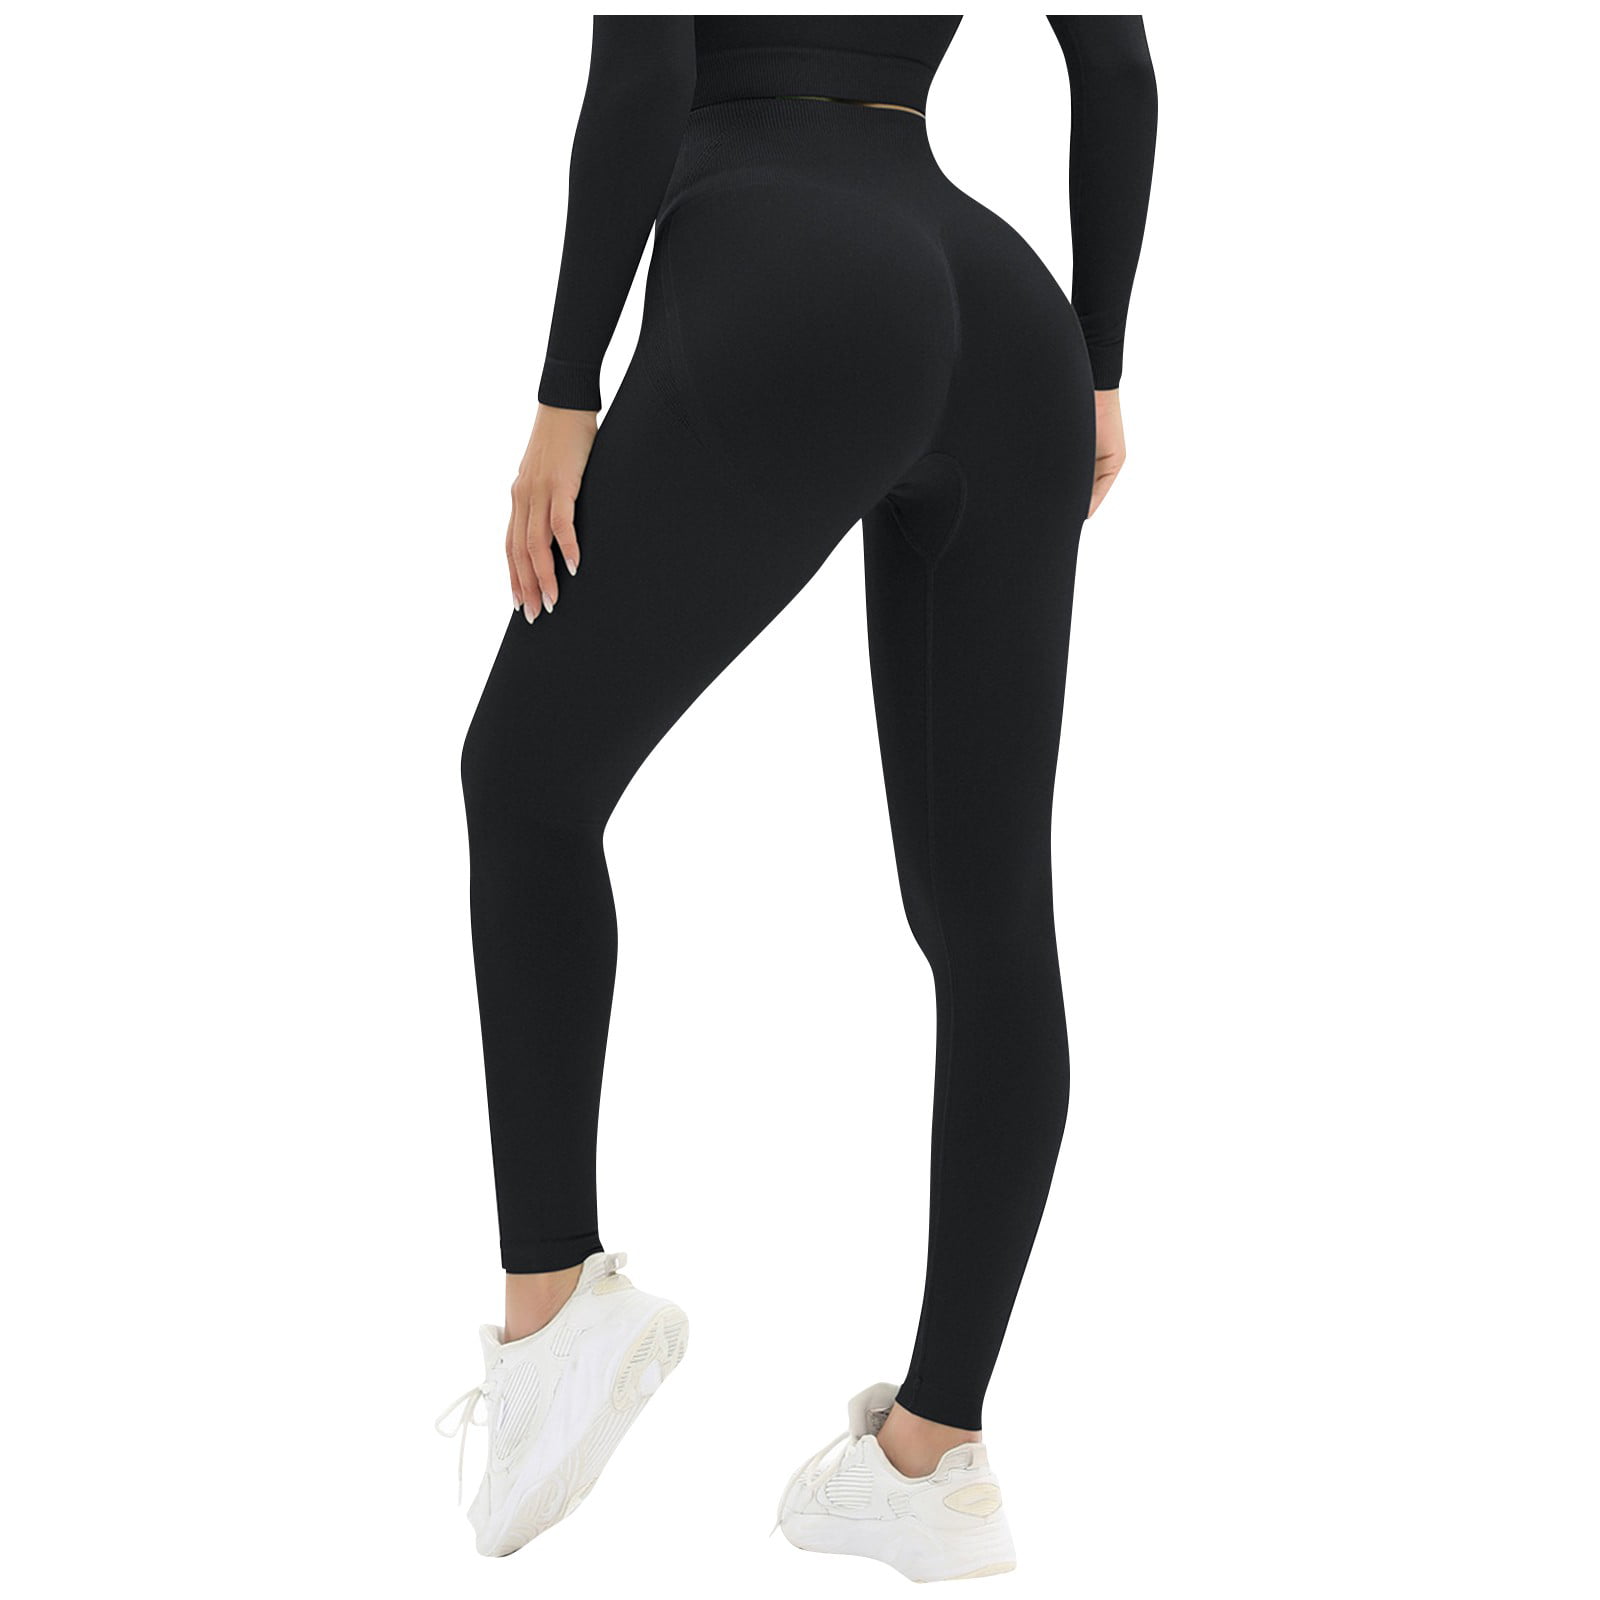 Royallove Women's Leisure Seamless Slim Fit Solid Color Sports Hip ...